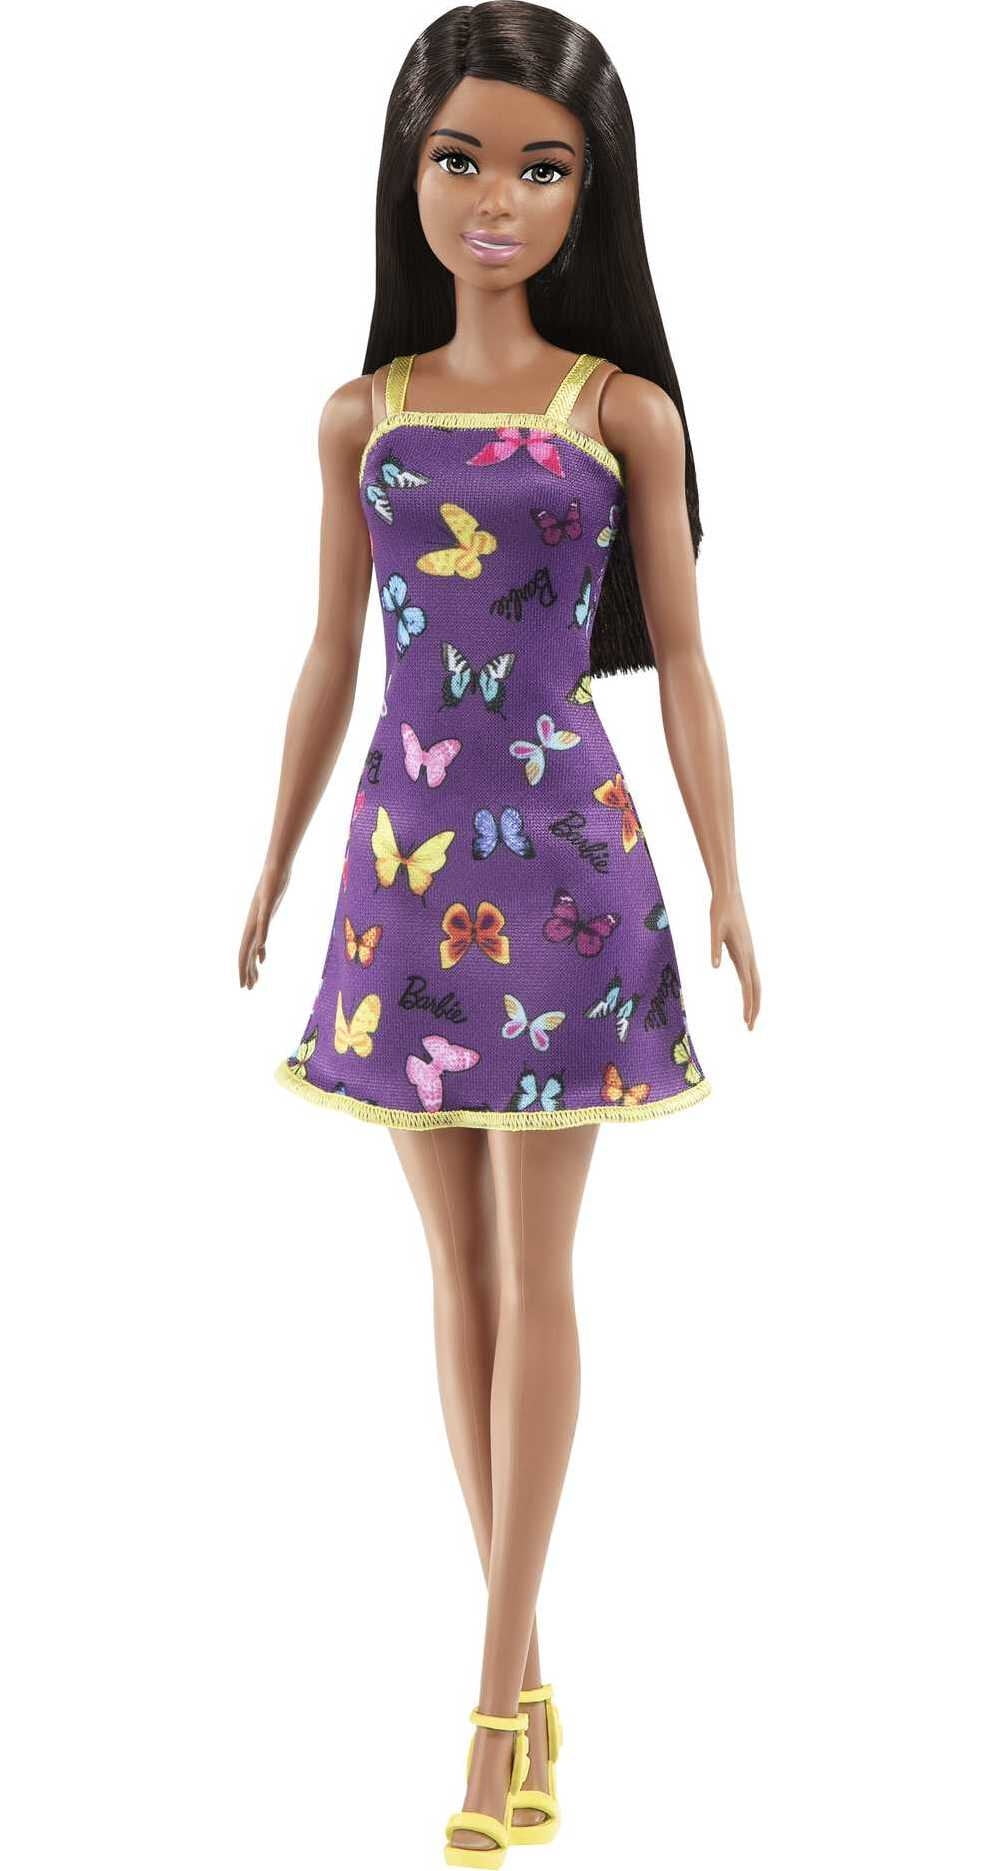 Barbie Fashion Doll with Black Hair Dressed in Colorful Butterfly Print ...